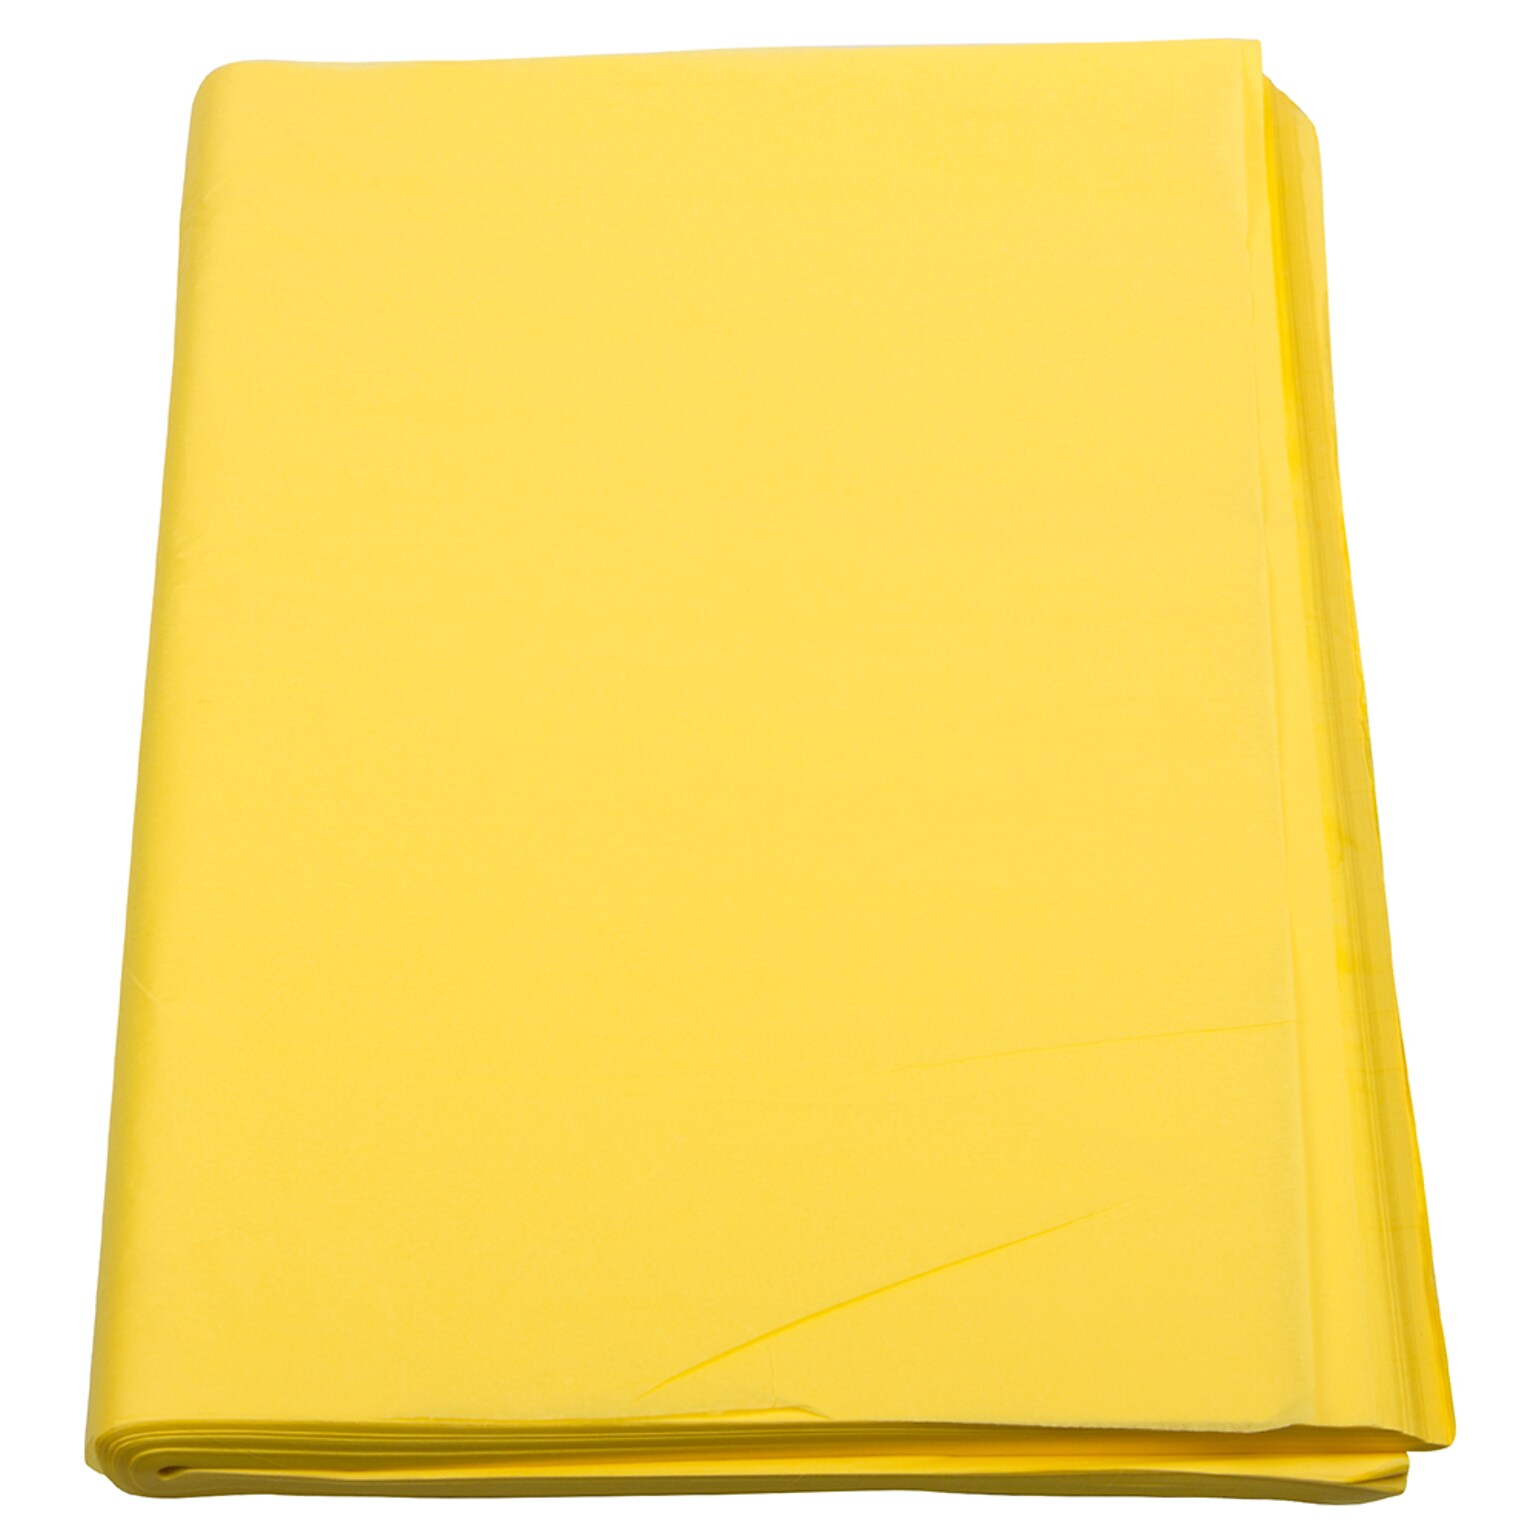 JAM PAPER Tissue Paper, Yellow, 480 Sheets/Ream